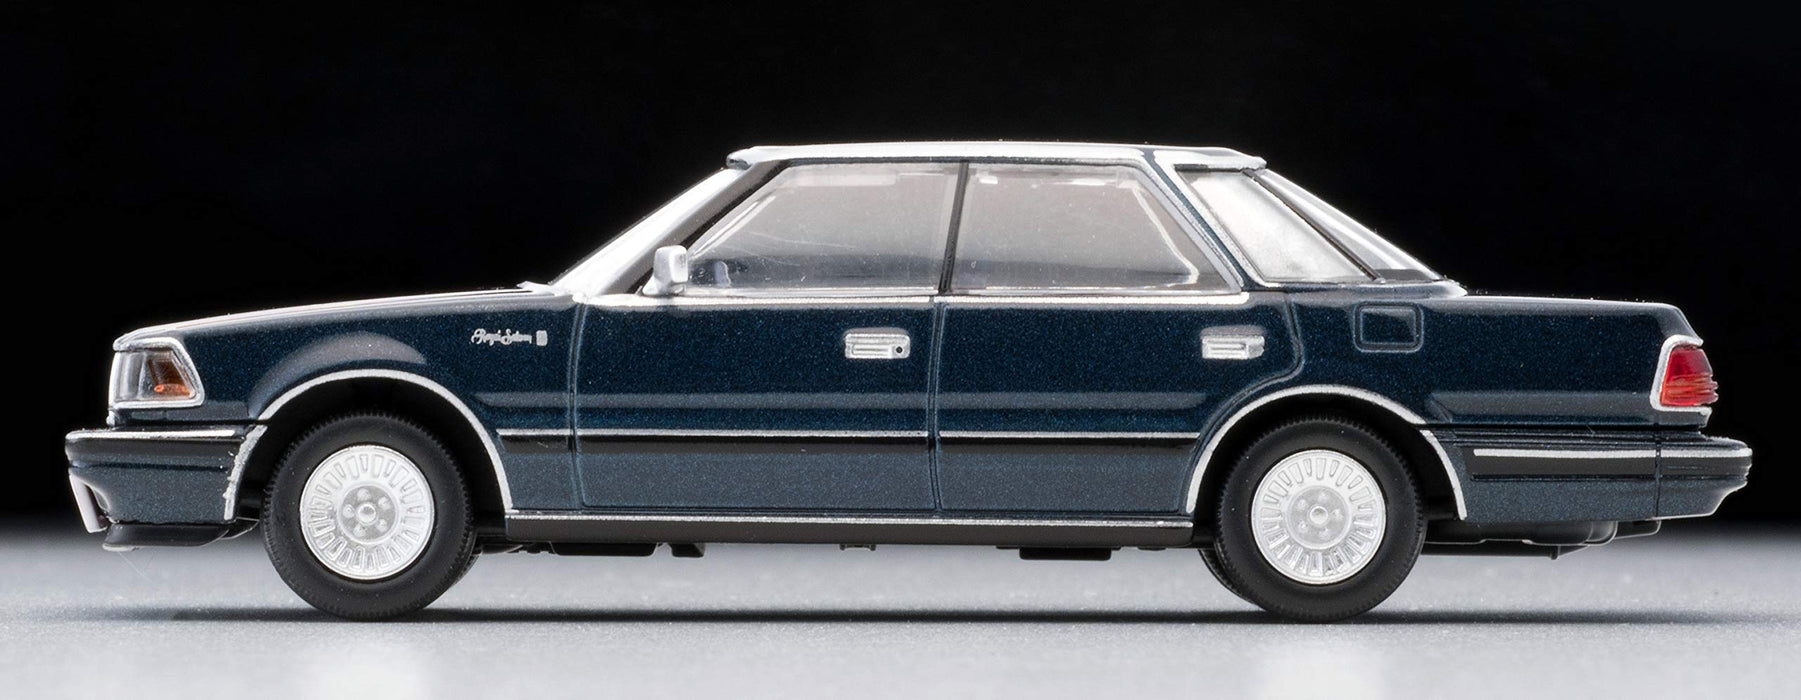 Tomytec Tomica Vintage Neo Toyota Crown 3.0 Royal Saloon G 85 Year Navy Edition 1/64 Scale